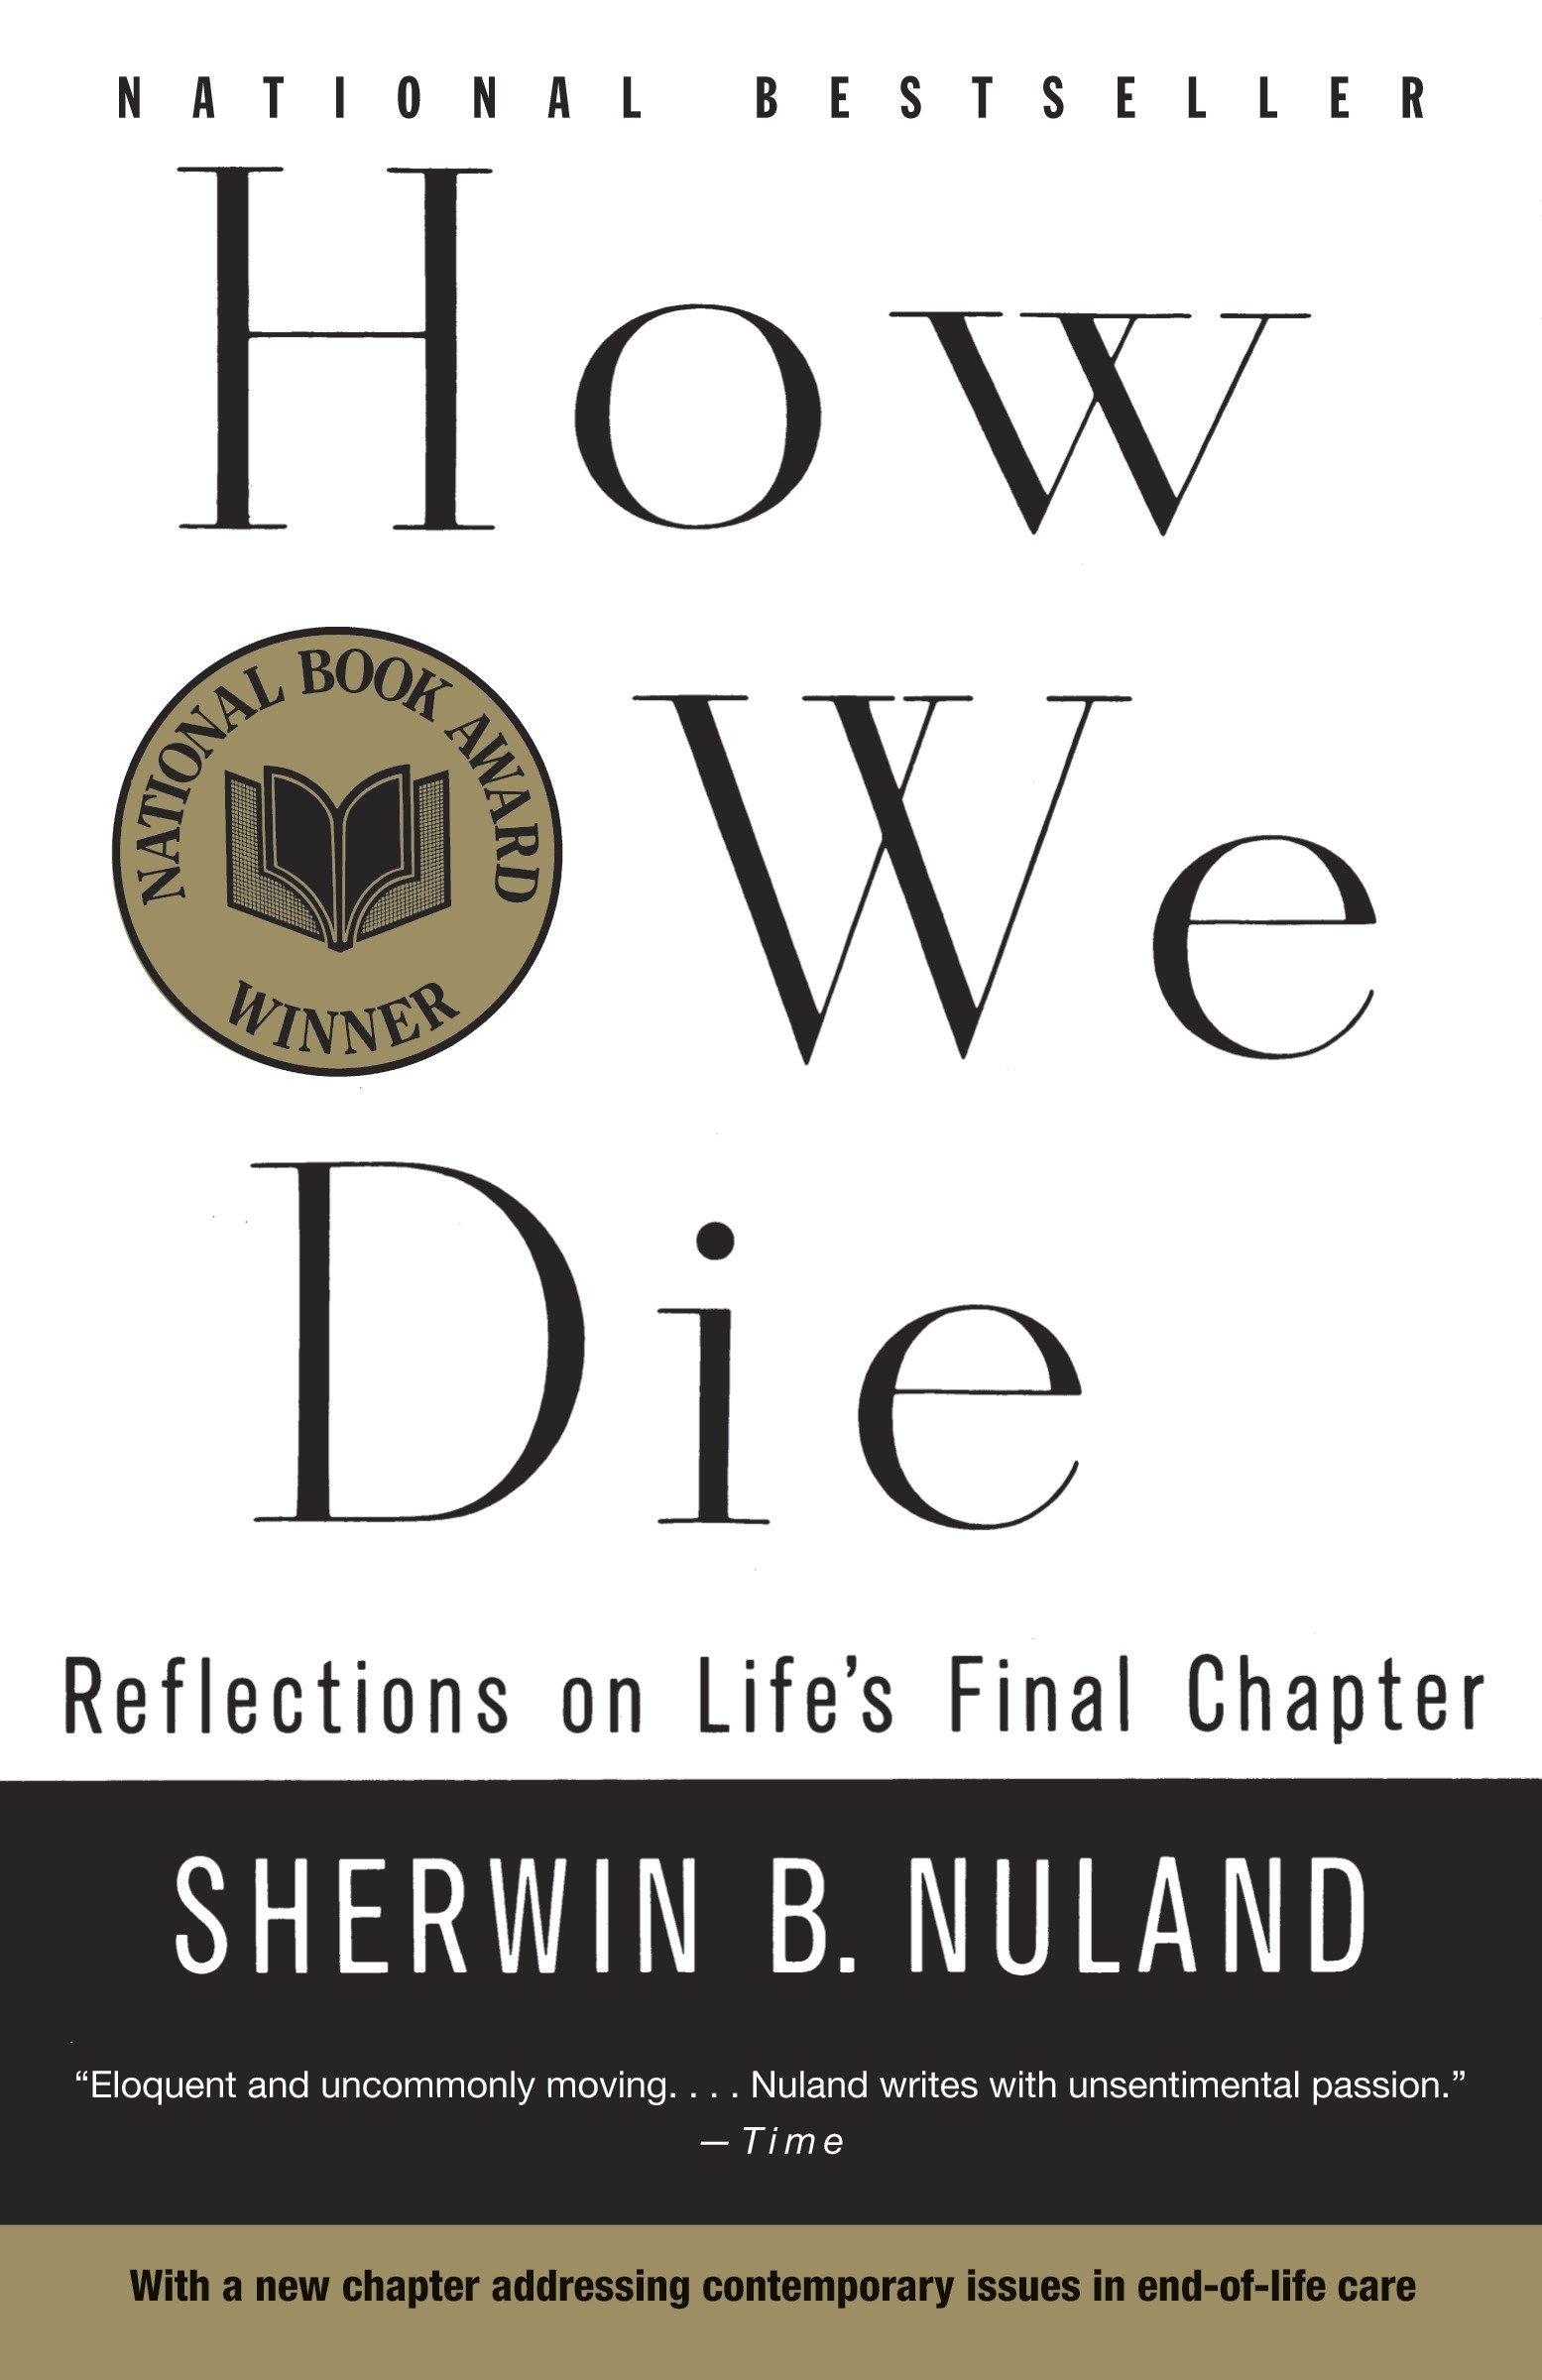 How We Die: Reflections on Life's Final Chapter, New Edition